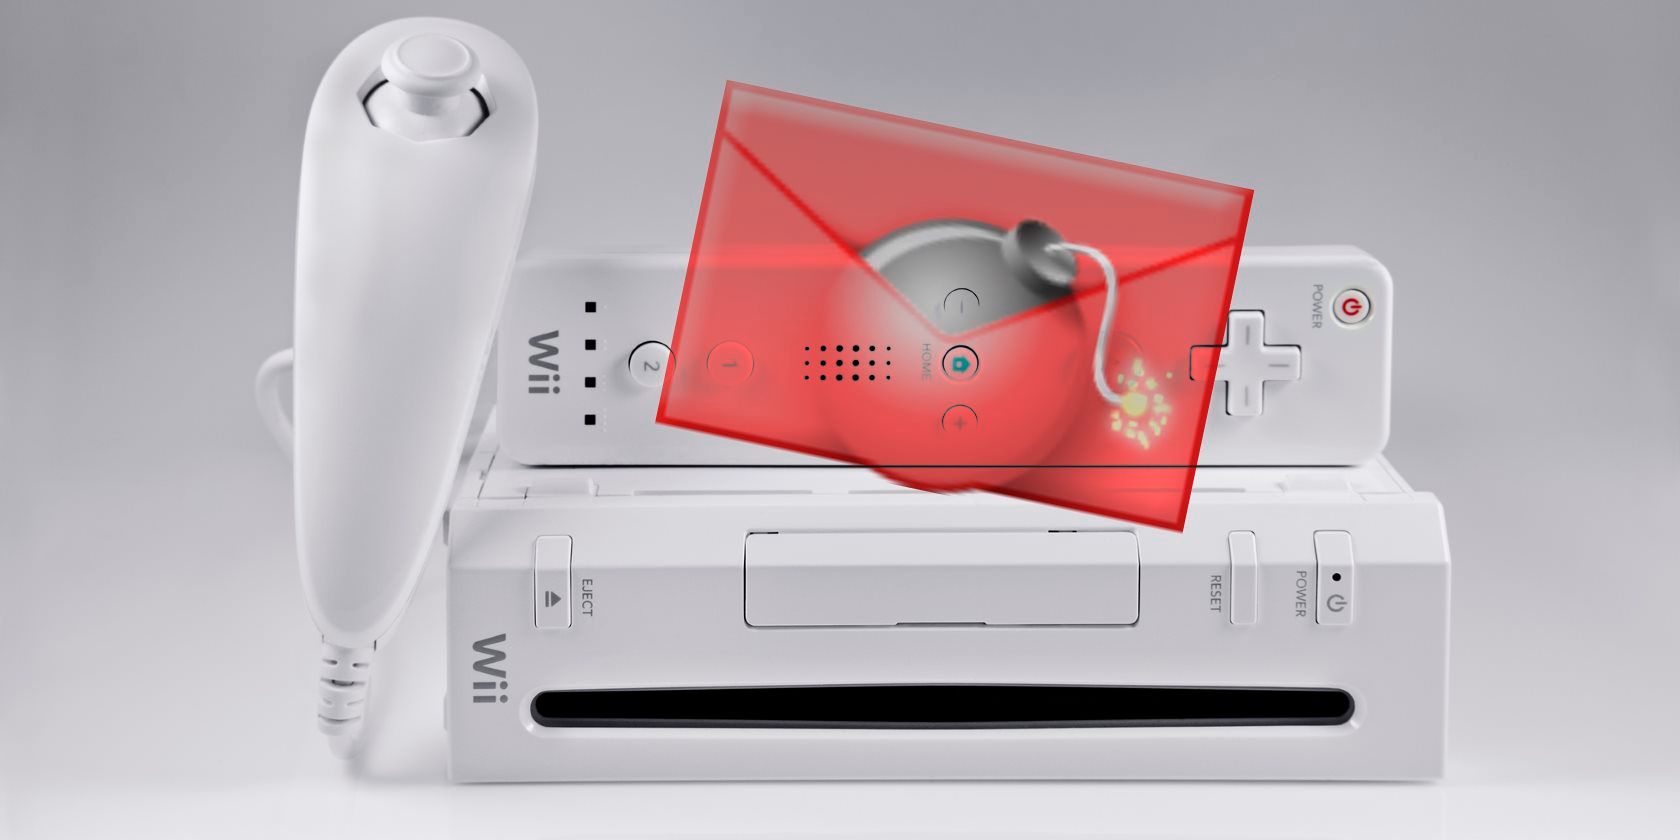 Vlot Verzorger Rand How to Install Homebrew on a Nintendo Wii Using LetterBomb